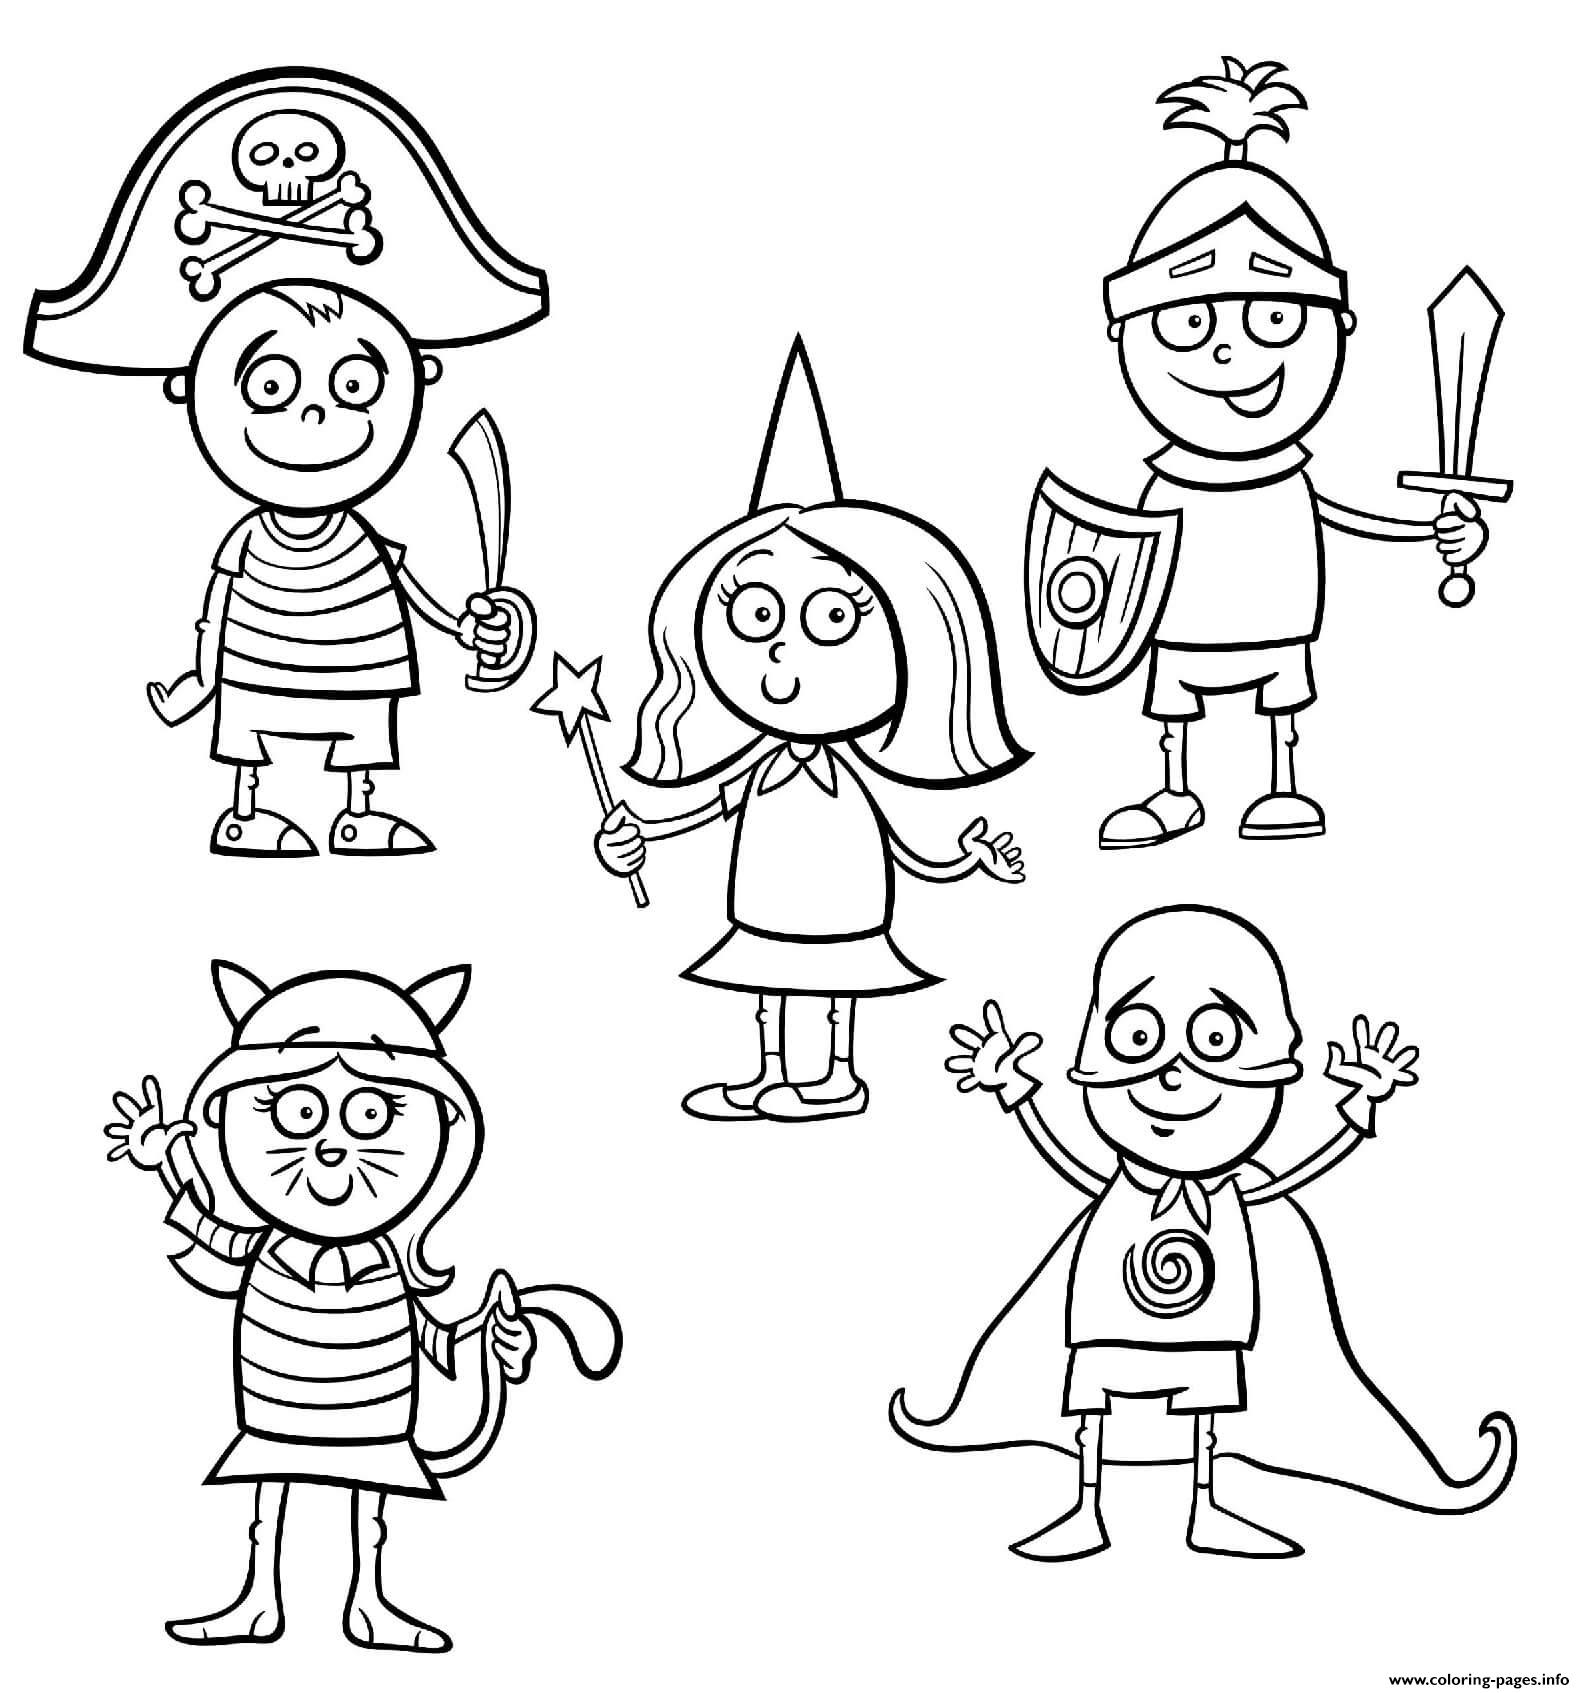 Halloween Costumes coloring